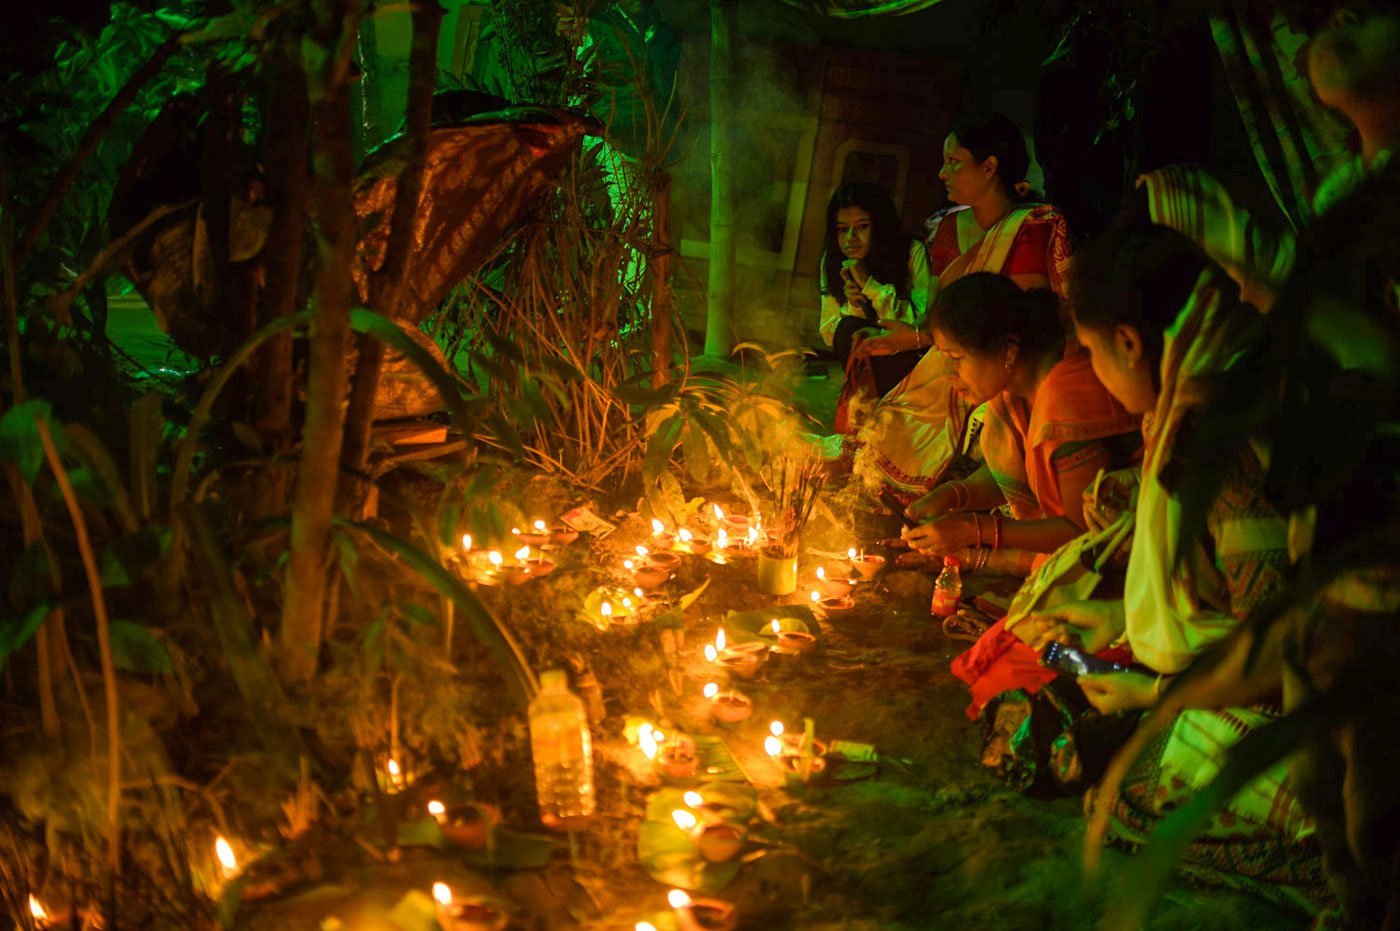 Women light diyas and incense sticks around a figure of Kaliyo Naag. The ritual is part of the prayers performed before the festival begins